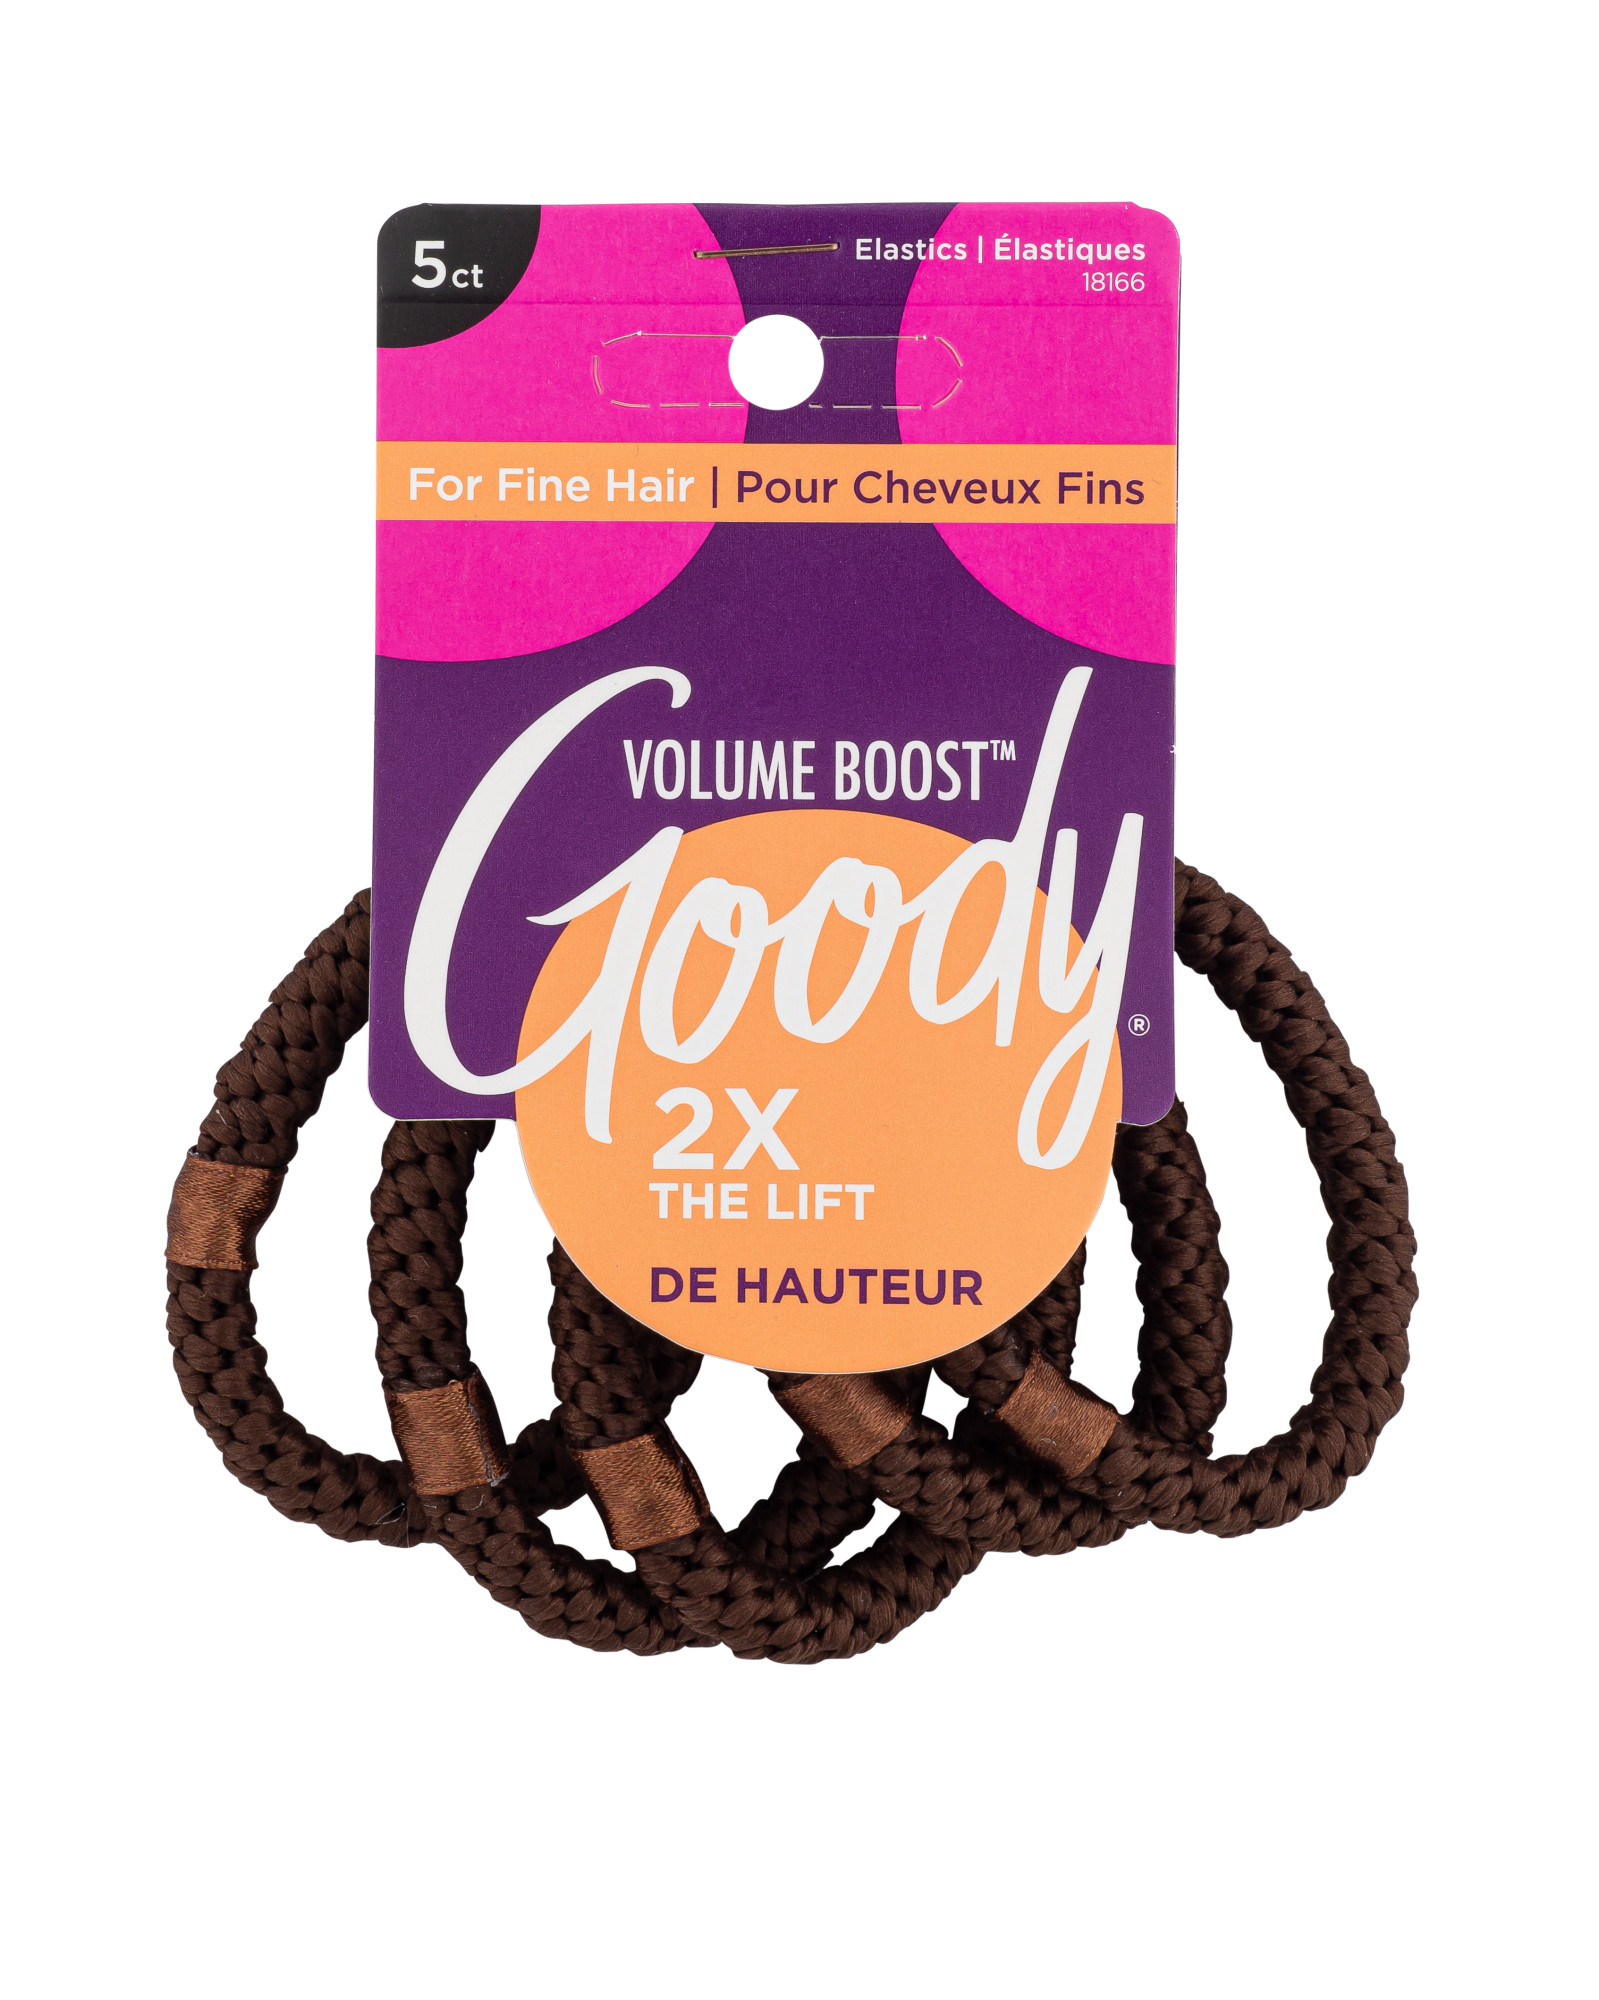 Goody® Volume Boost™ Ouchless® Brown Ponytailers Elastics for Fine Hair, 5 CT - image 1 of 4